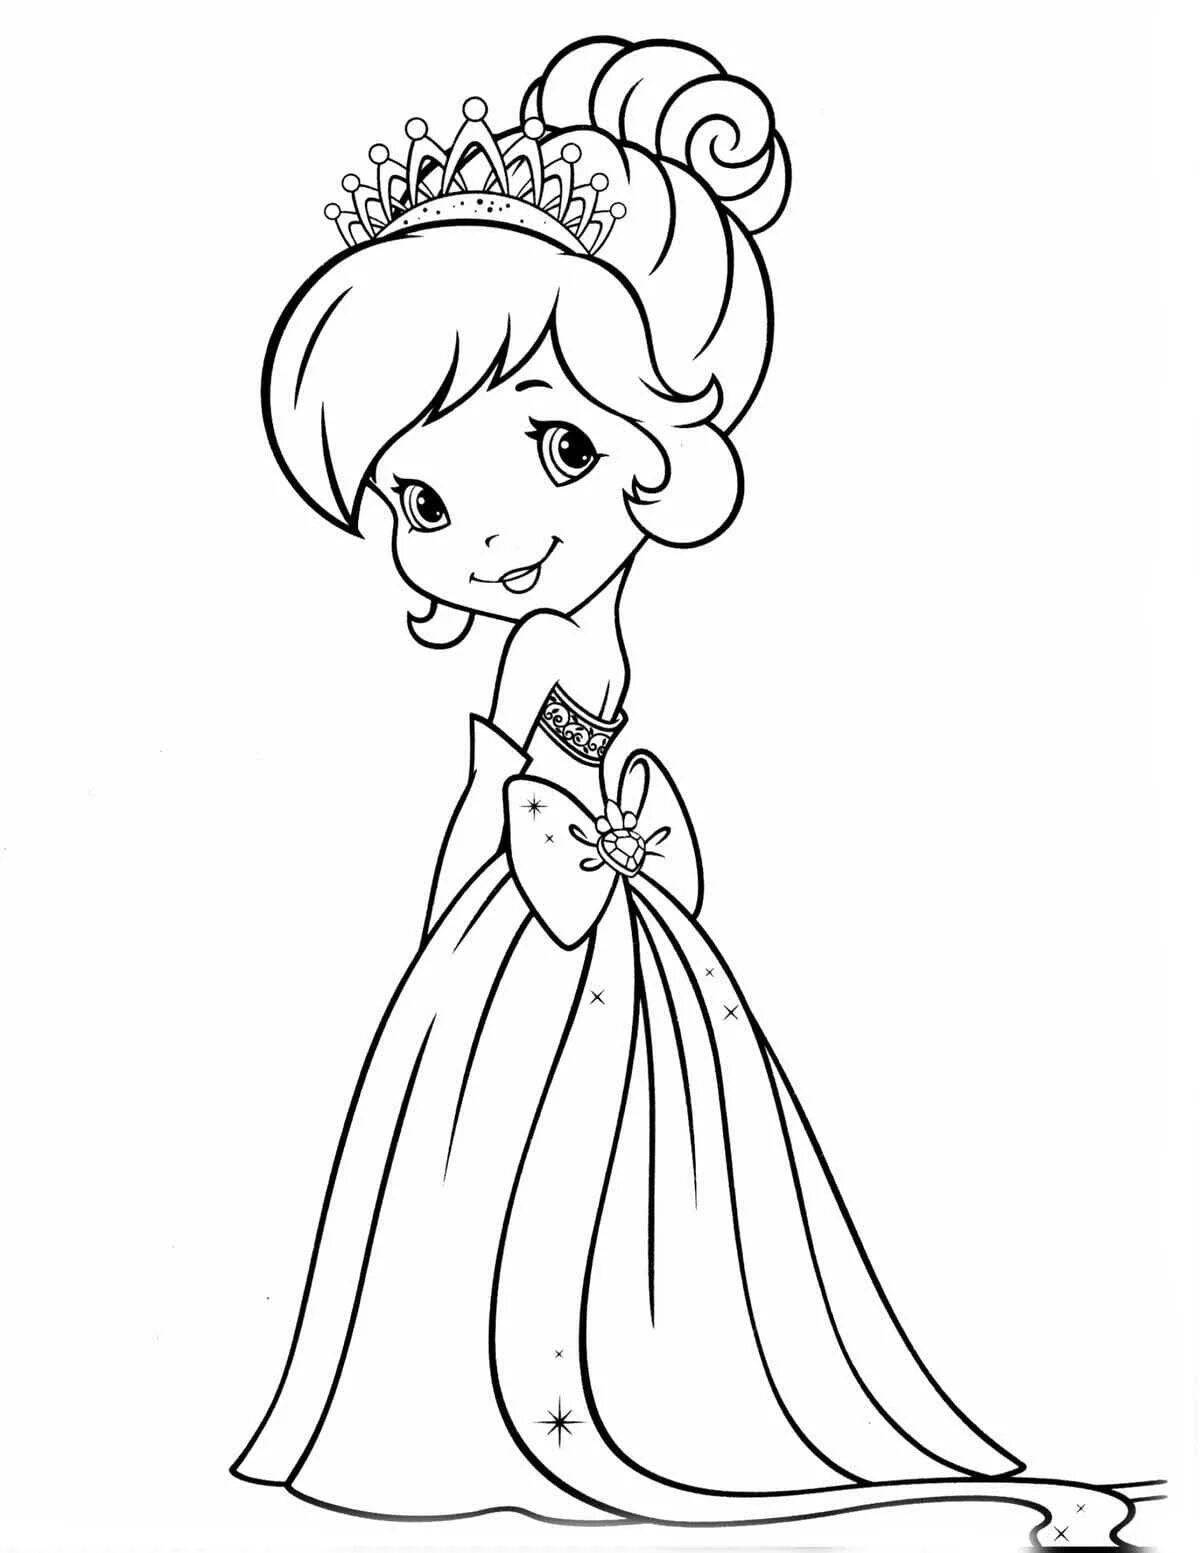 Elegant coloring page include princesses